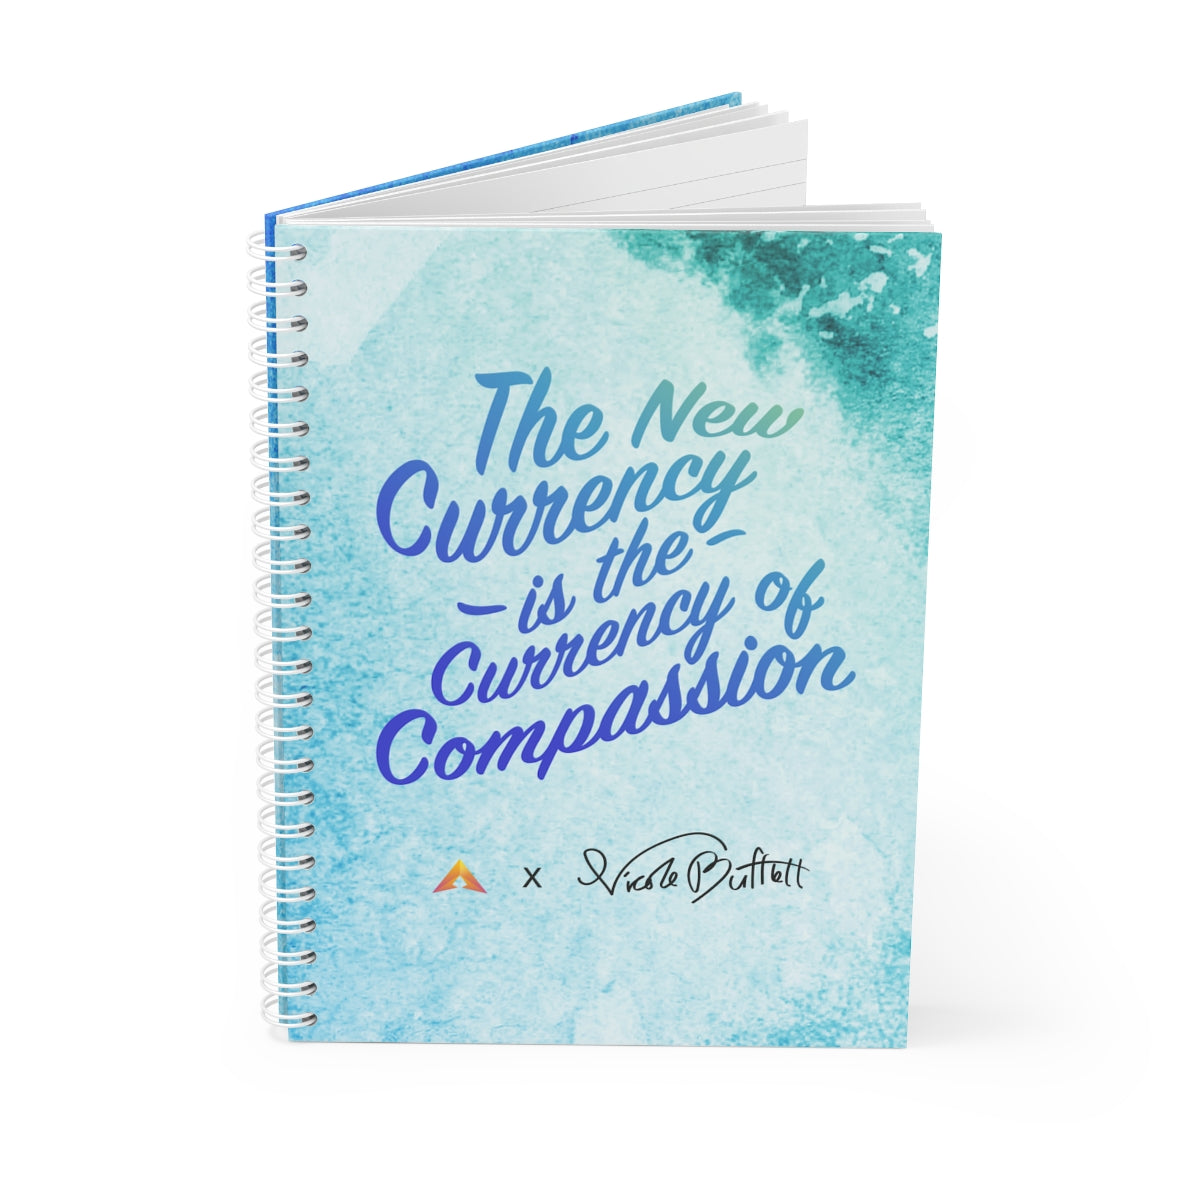 Nicole Buffett "The New Currency" Notebook (Limited Edition)